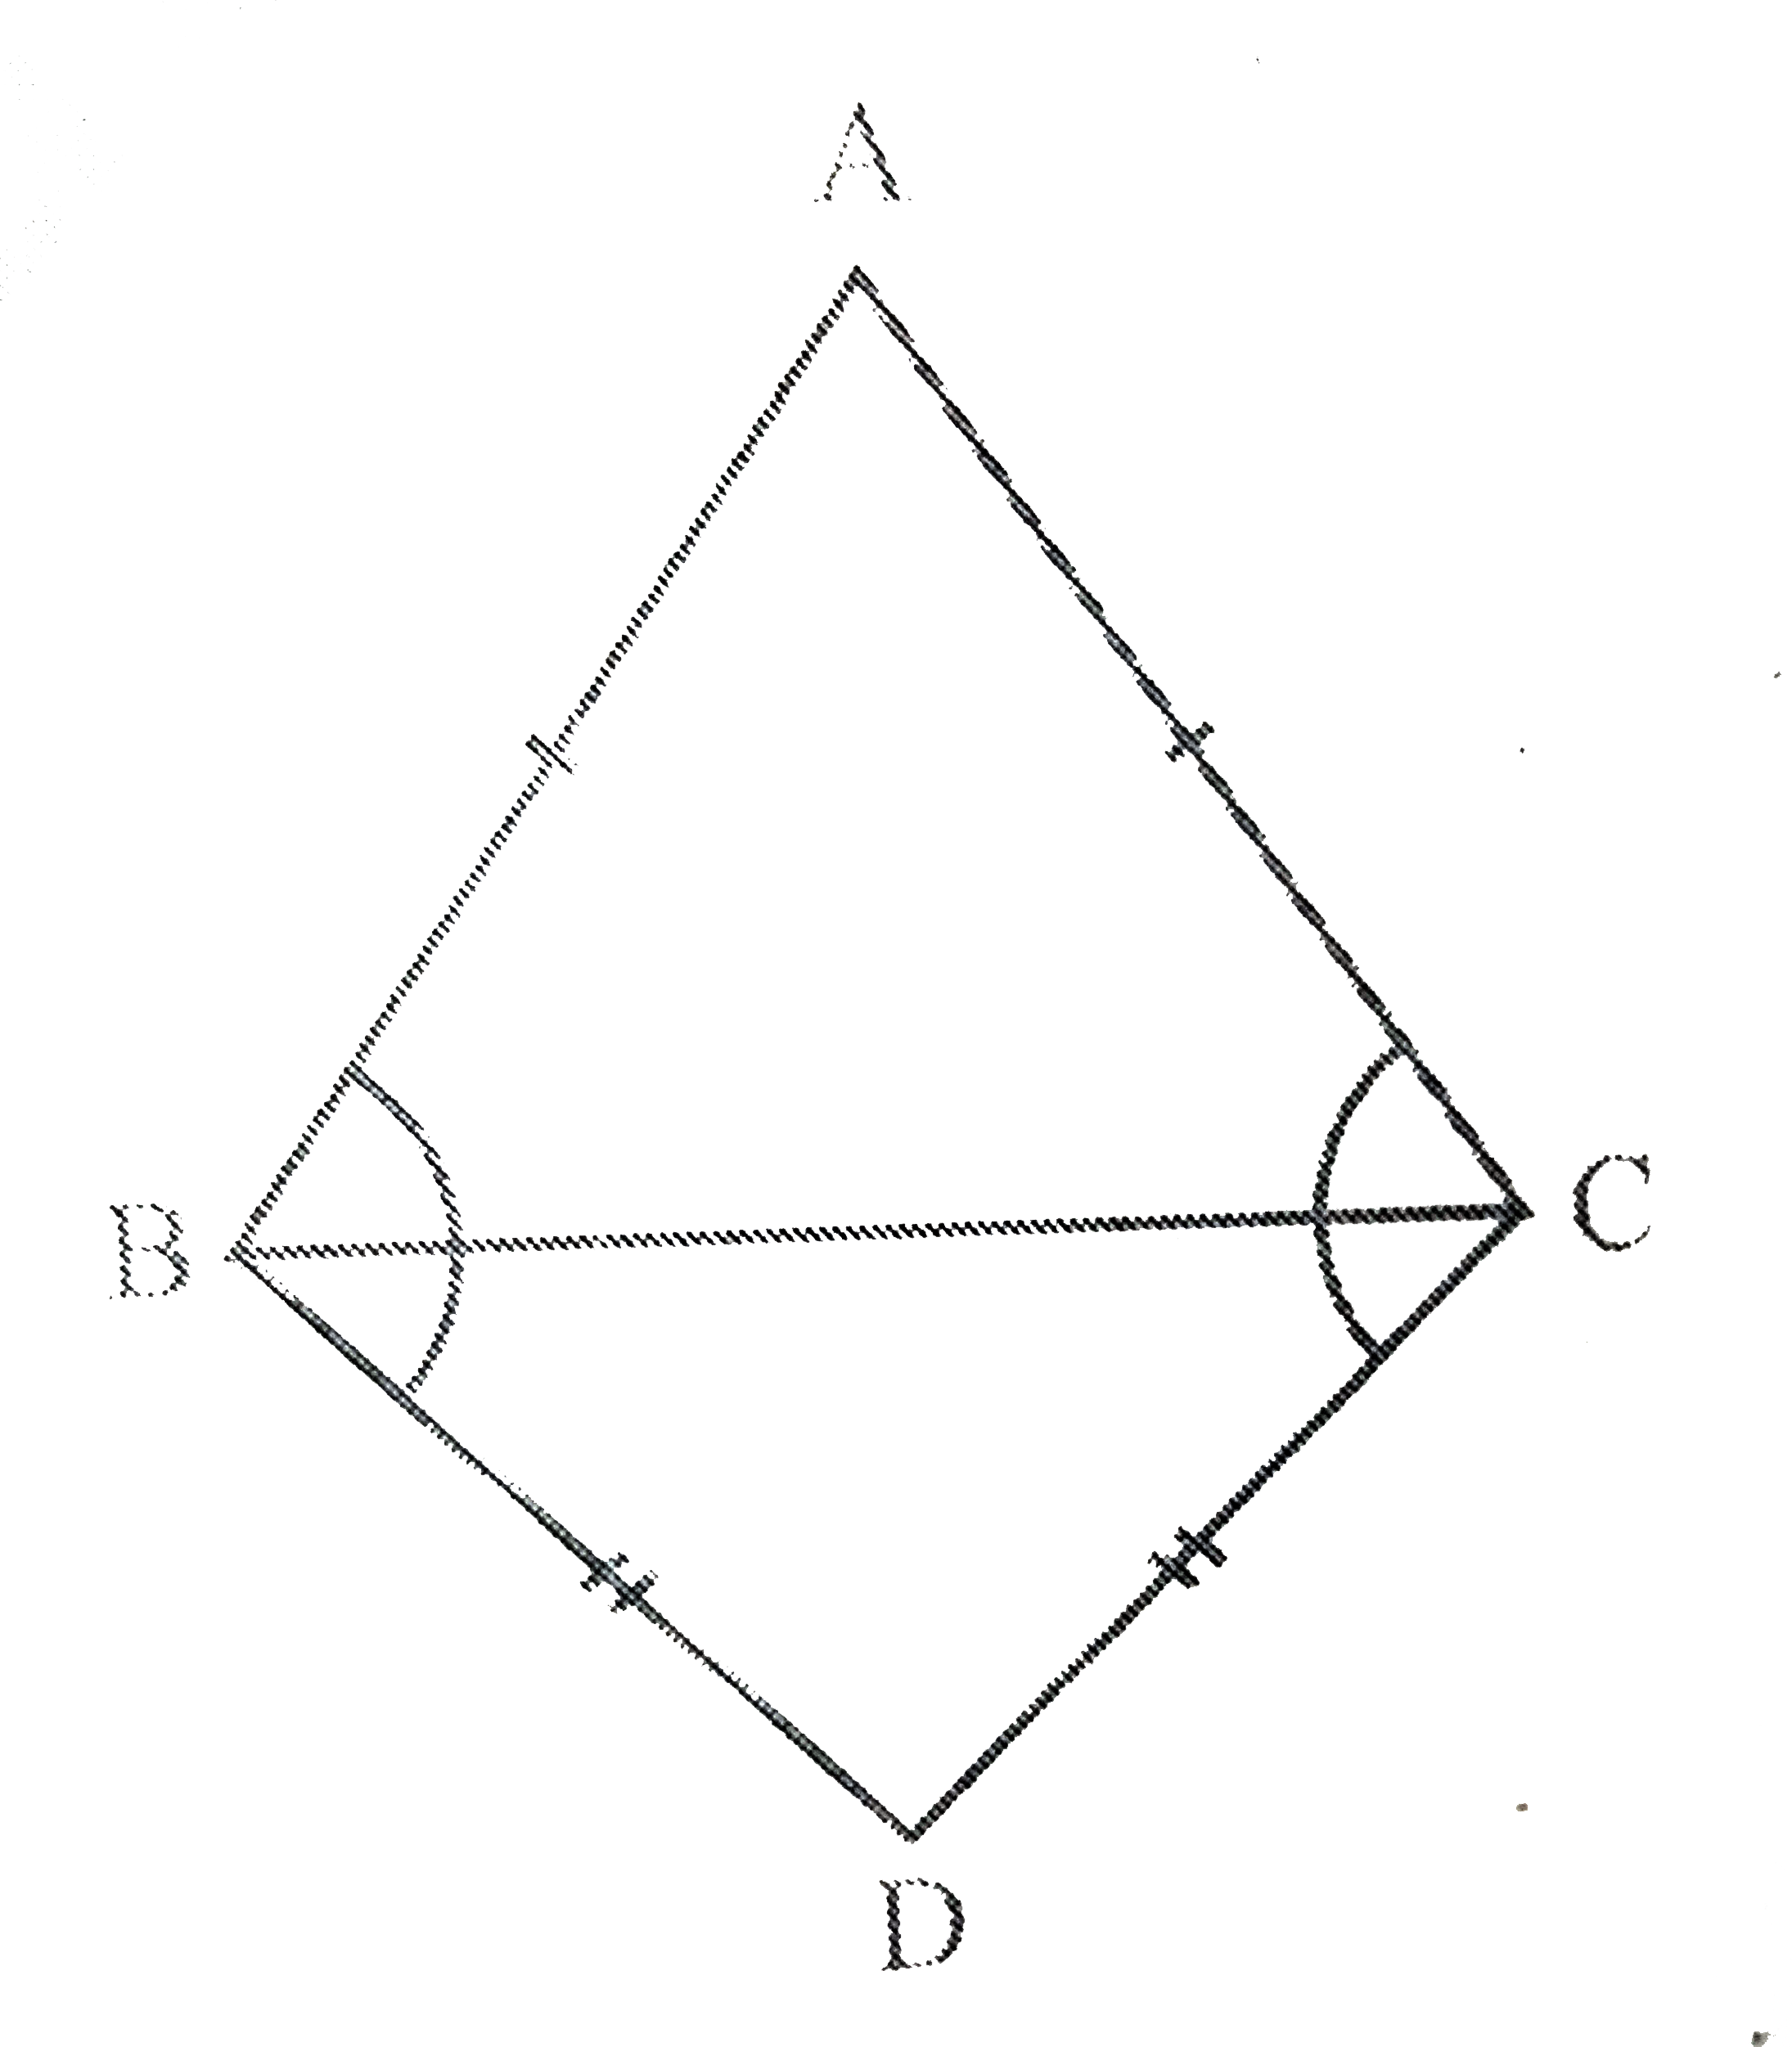 ABC and DBC  are two isosceles triangles on the same base BC (see Fig. 7.33). Show that/A B D\ =/A C D